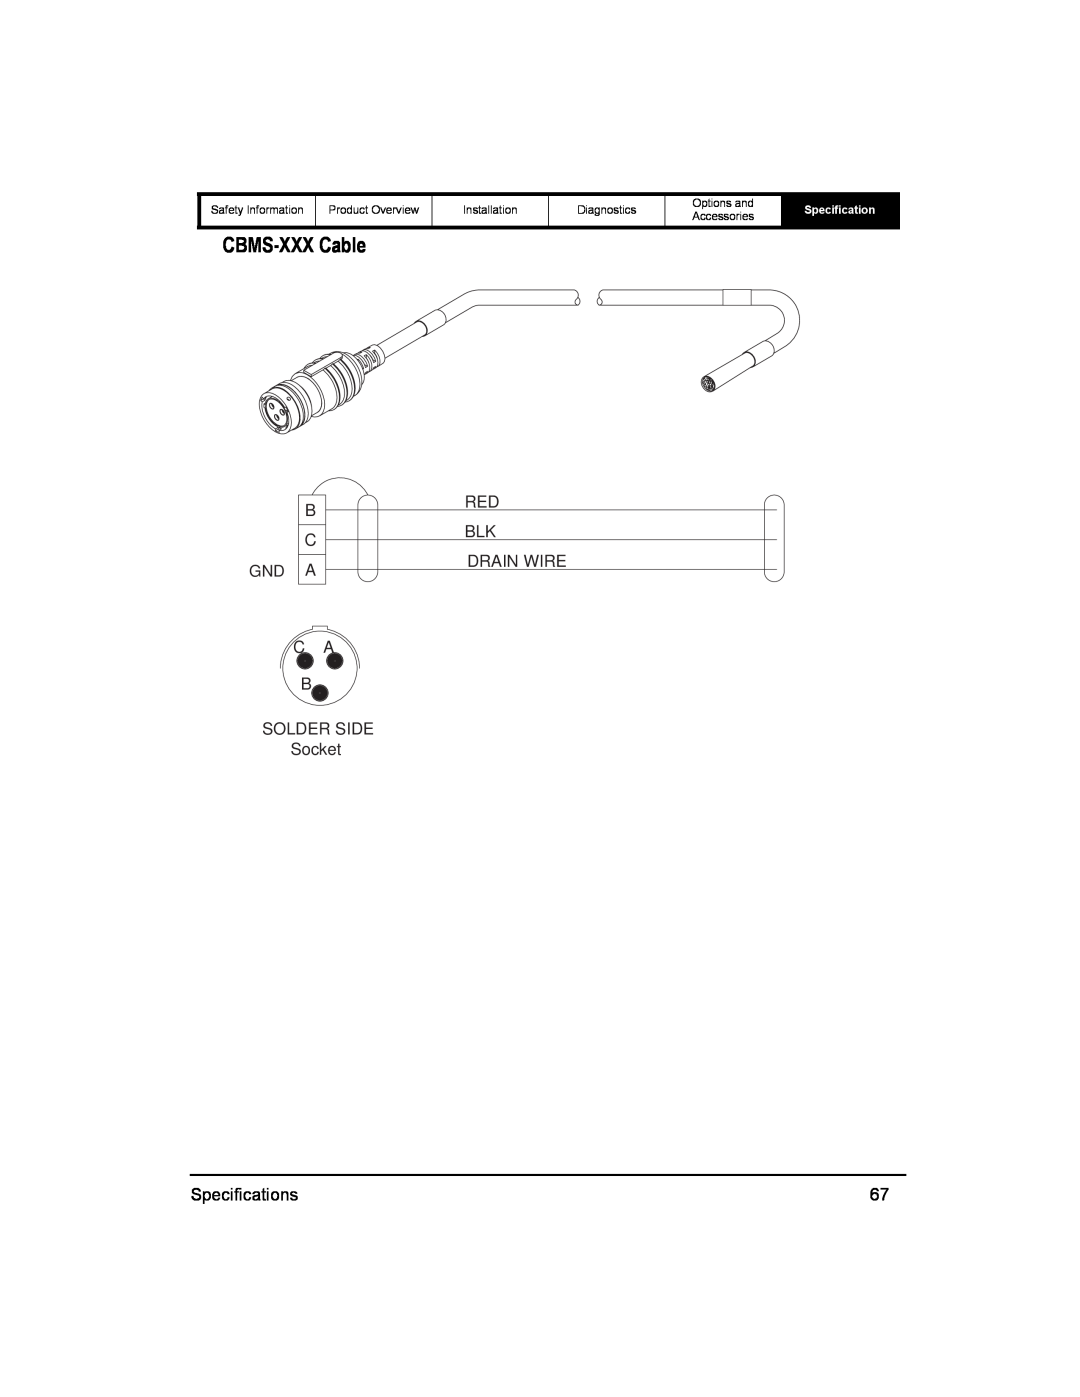 Emerson 400518-01 installation manual CBMS-XXX Cable, Gnd A, Specification 